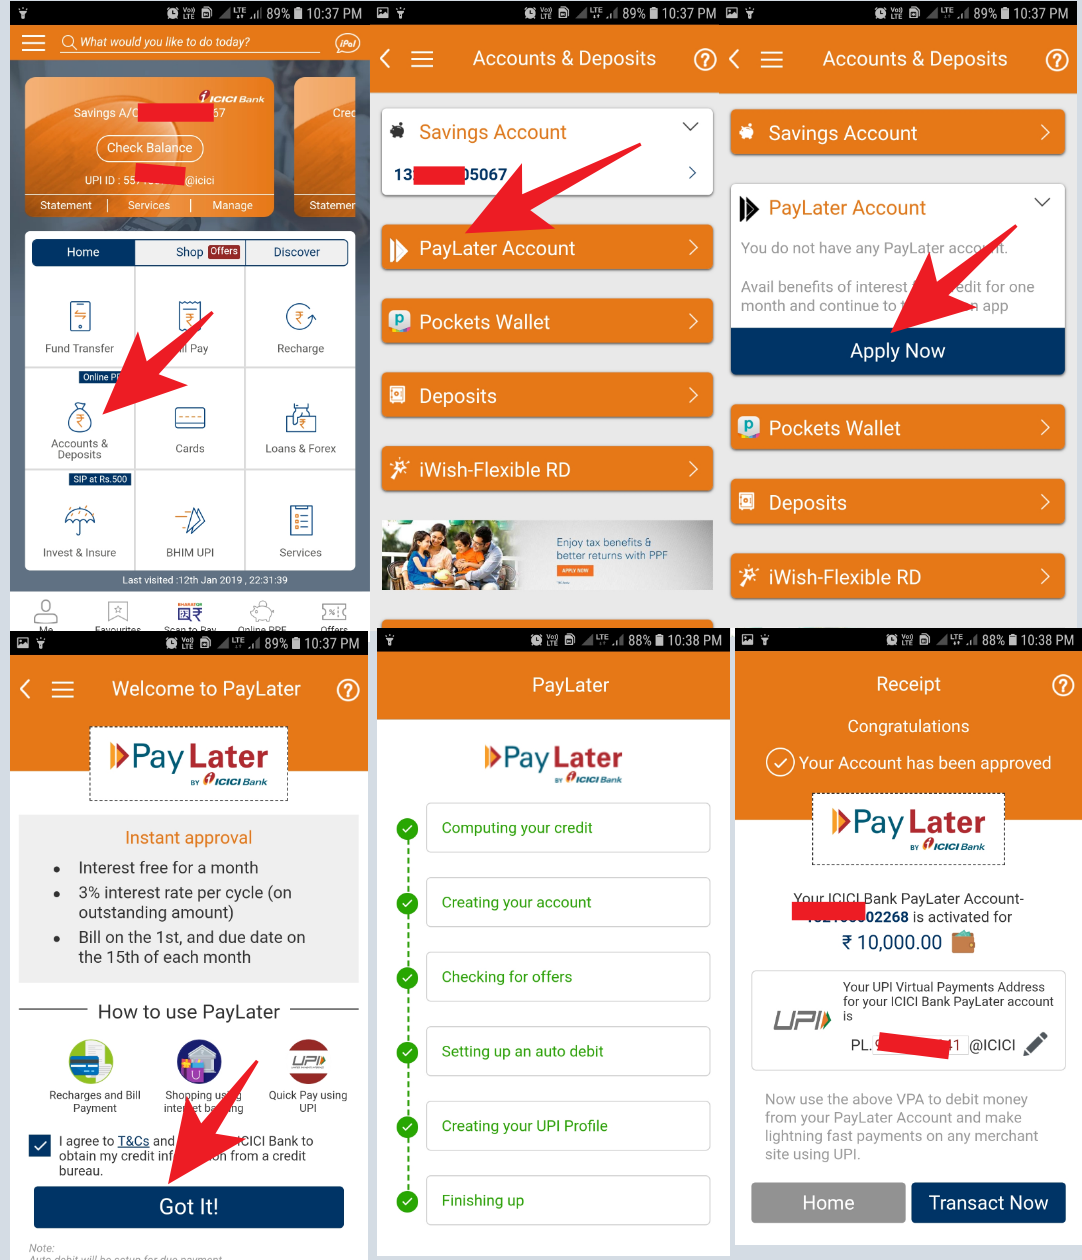 ICICI PayLater account full details in Hindi - Knowledge finder